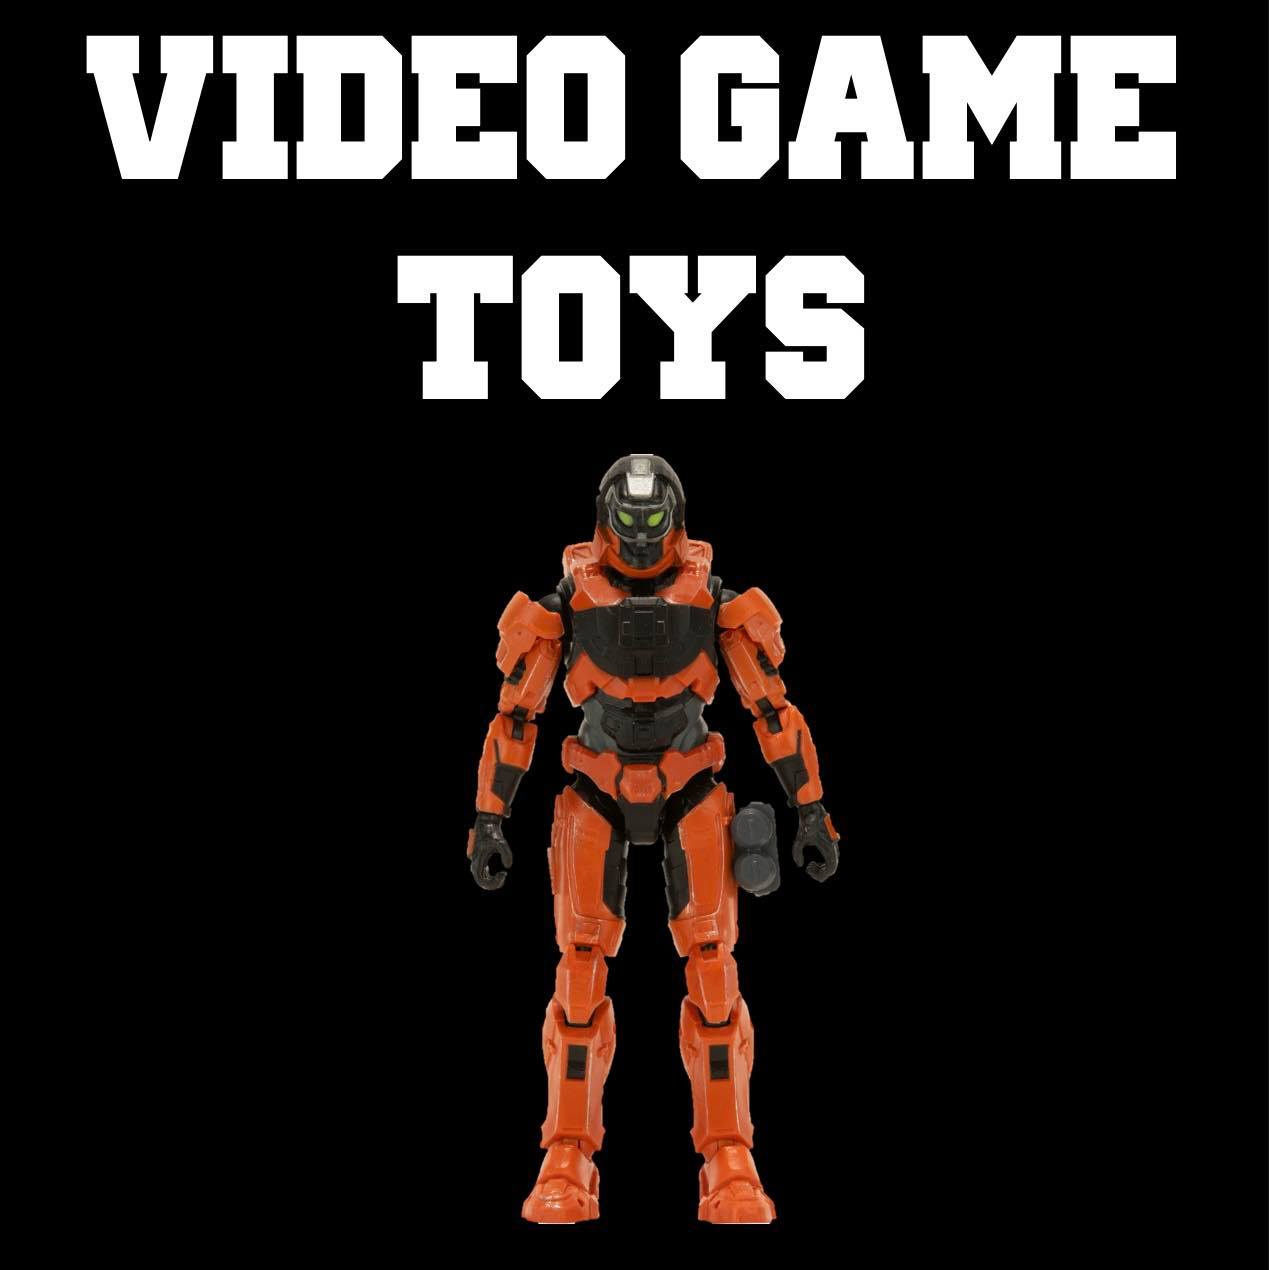 Video Game Toys